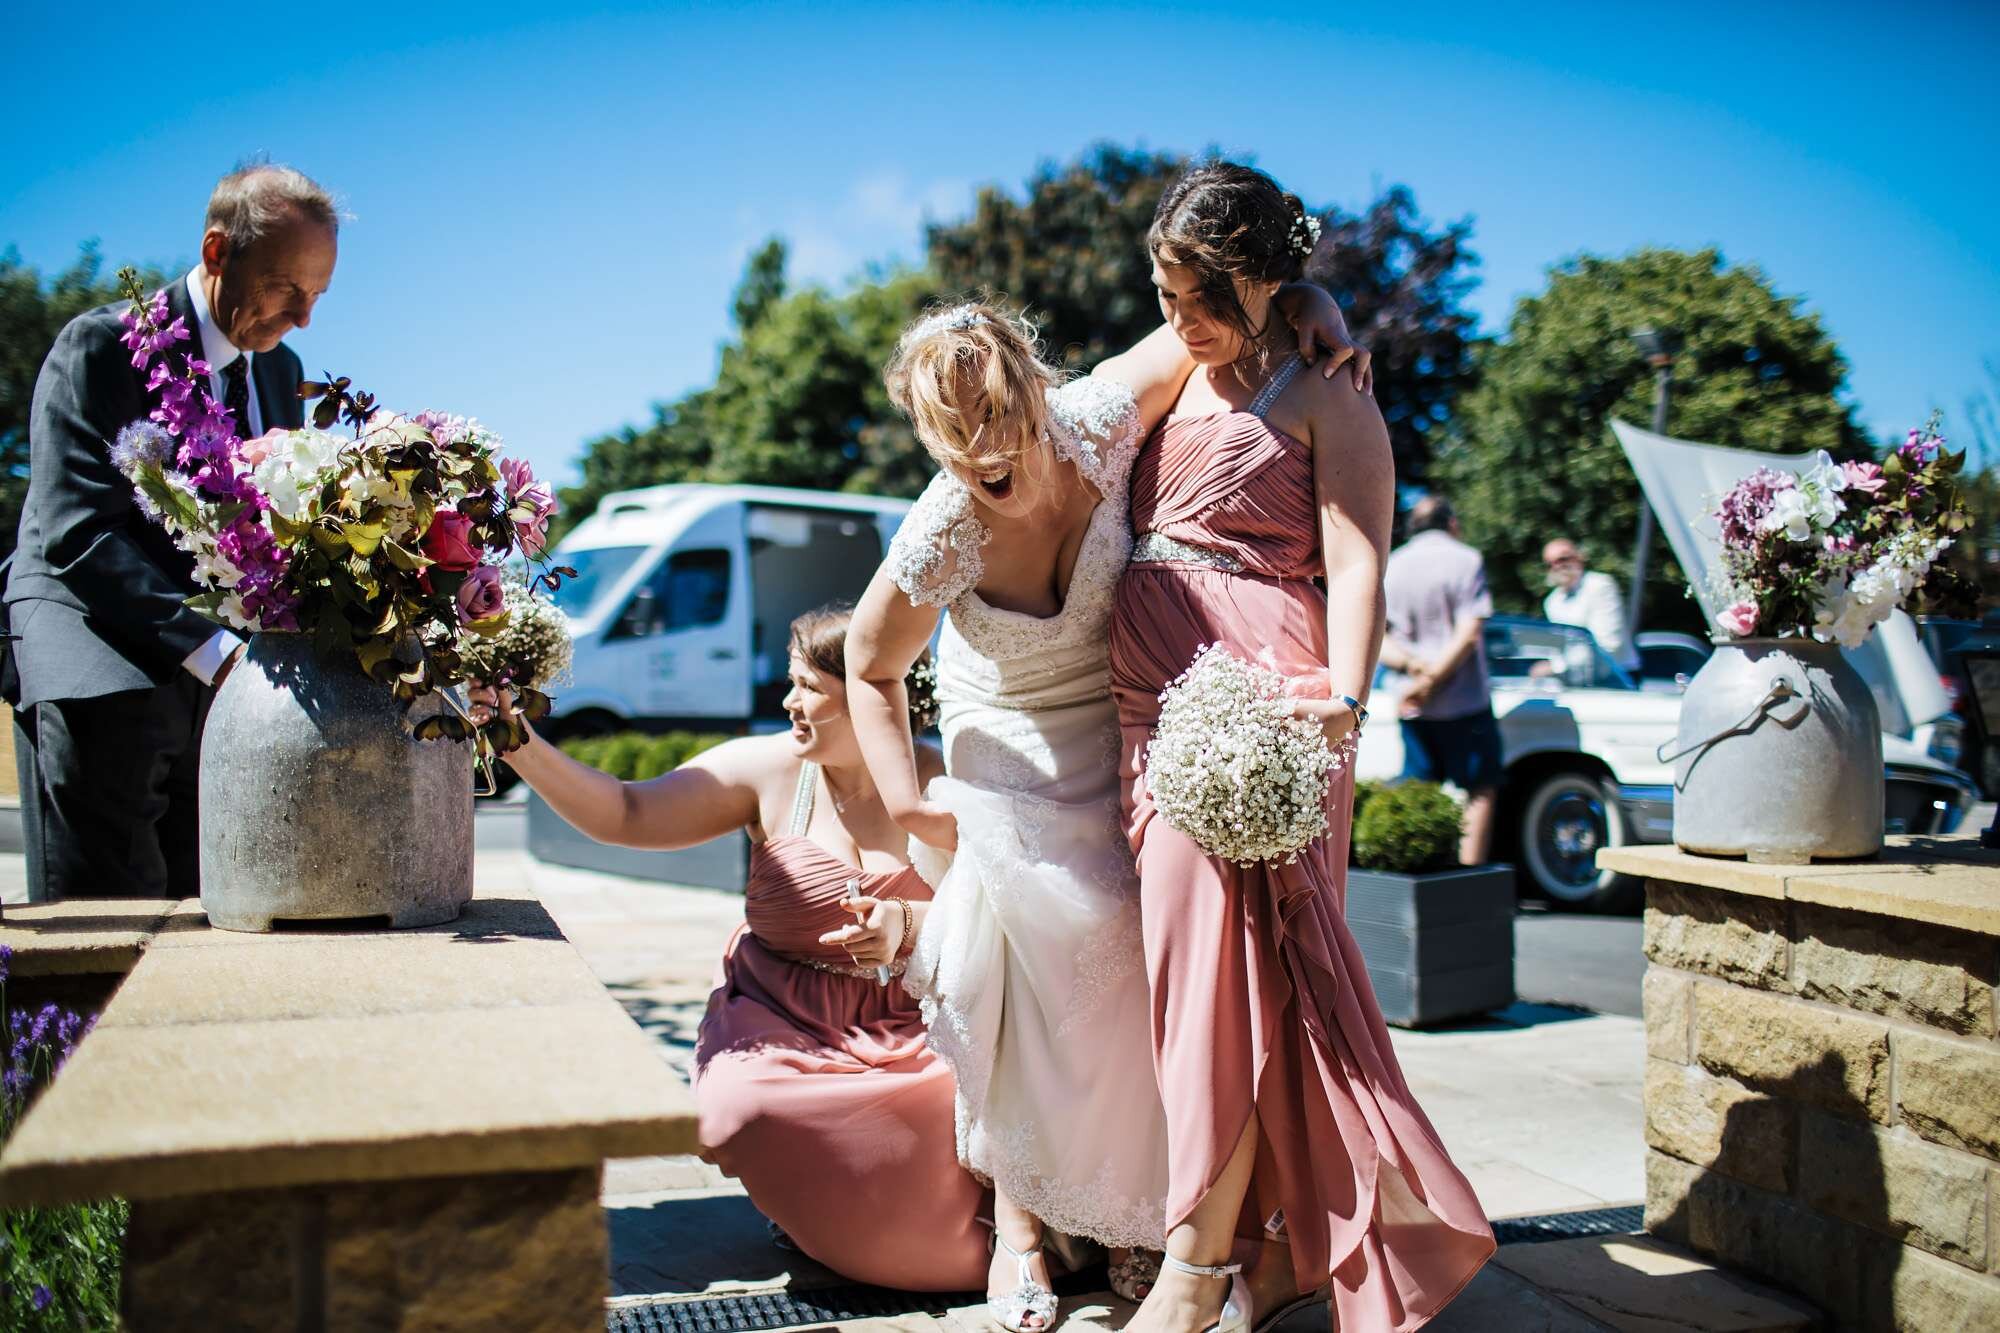 Bride gets her shoe caught in a drain